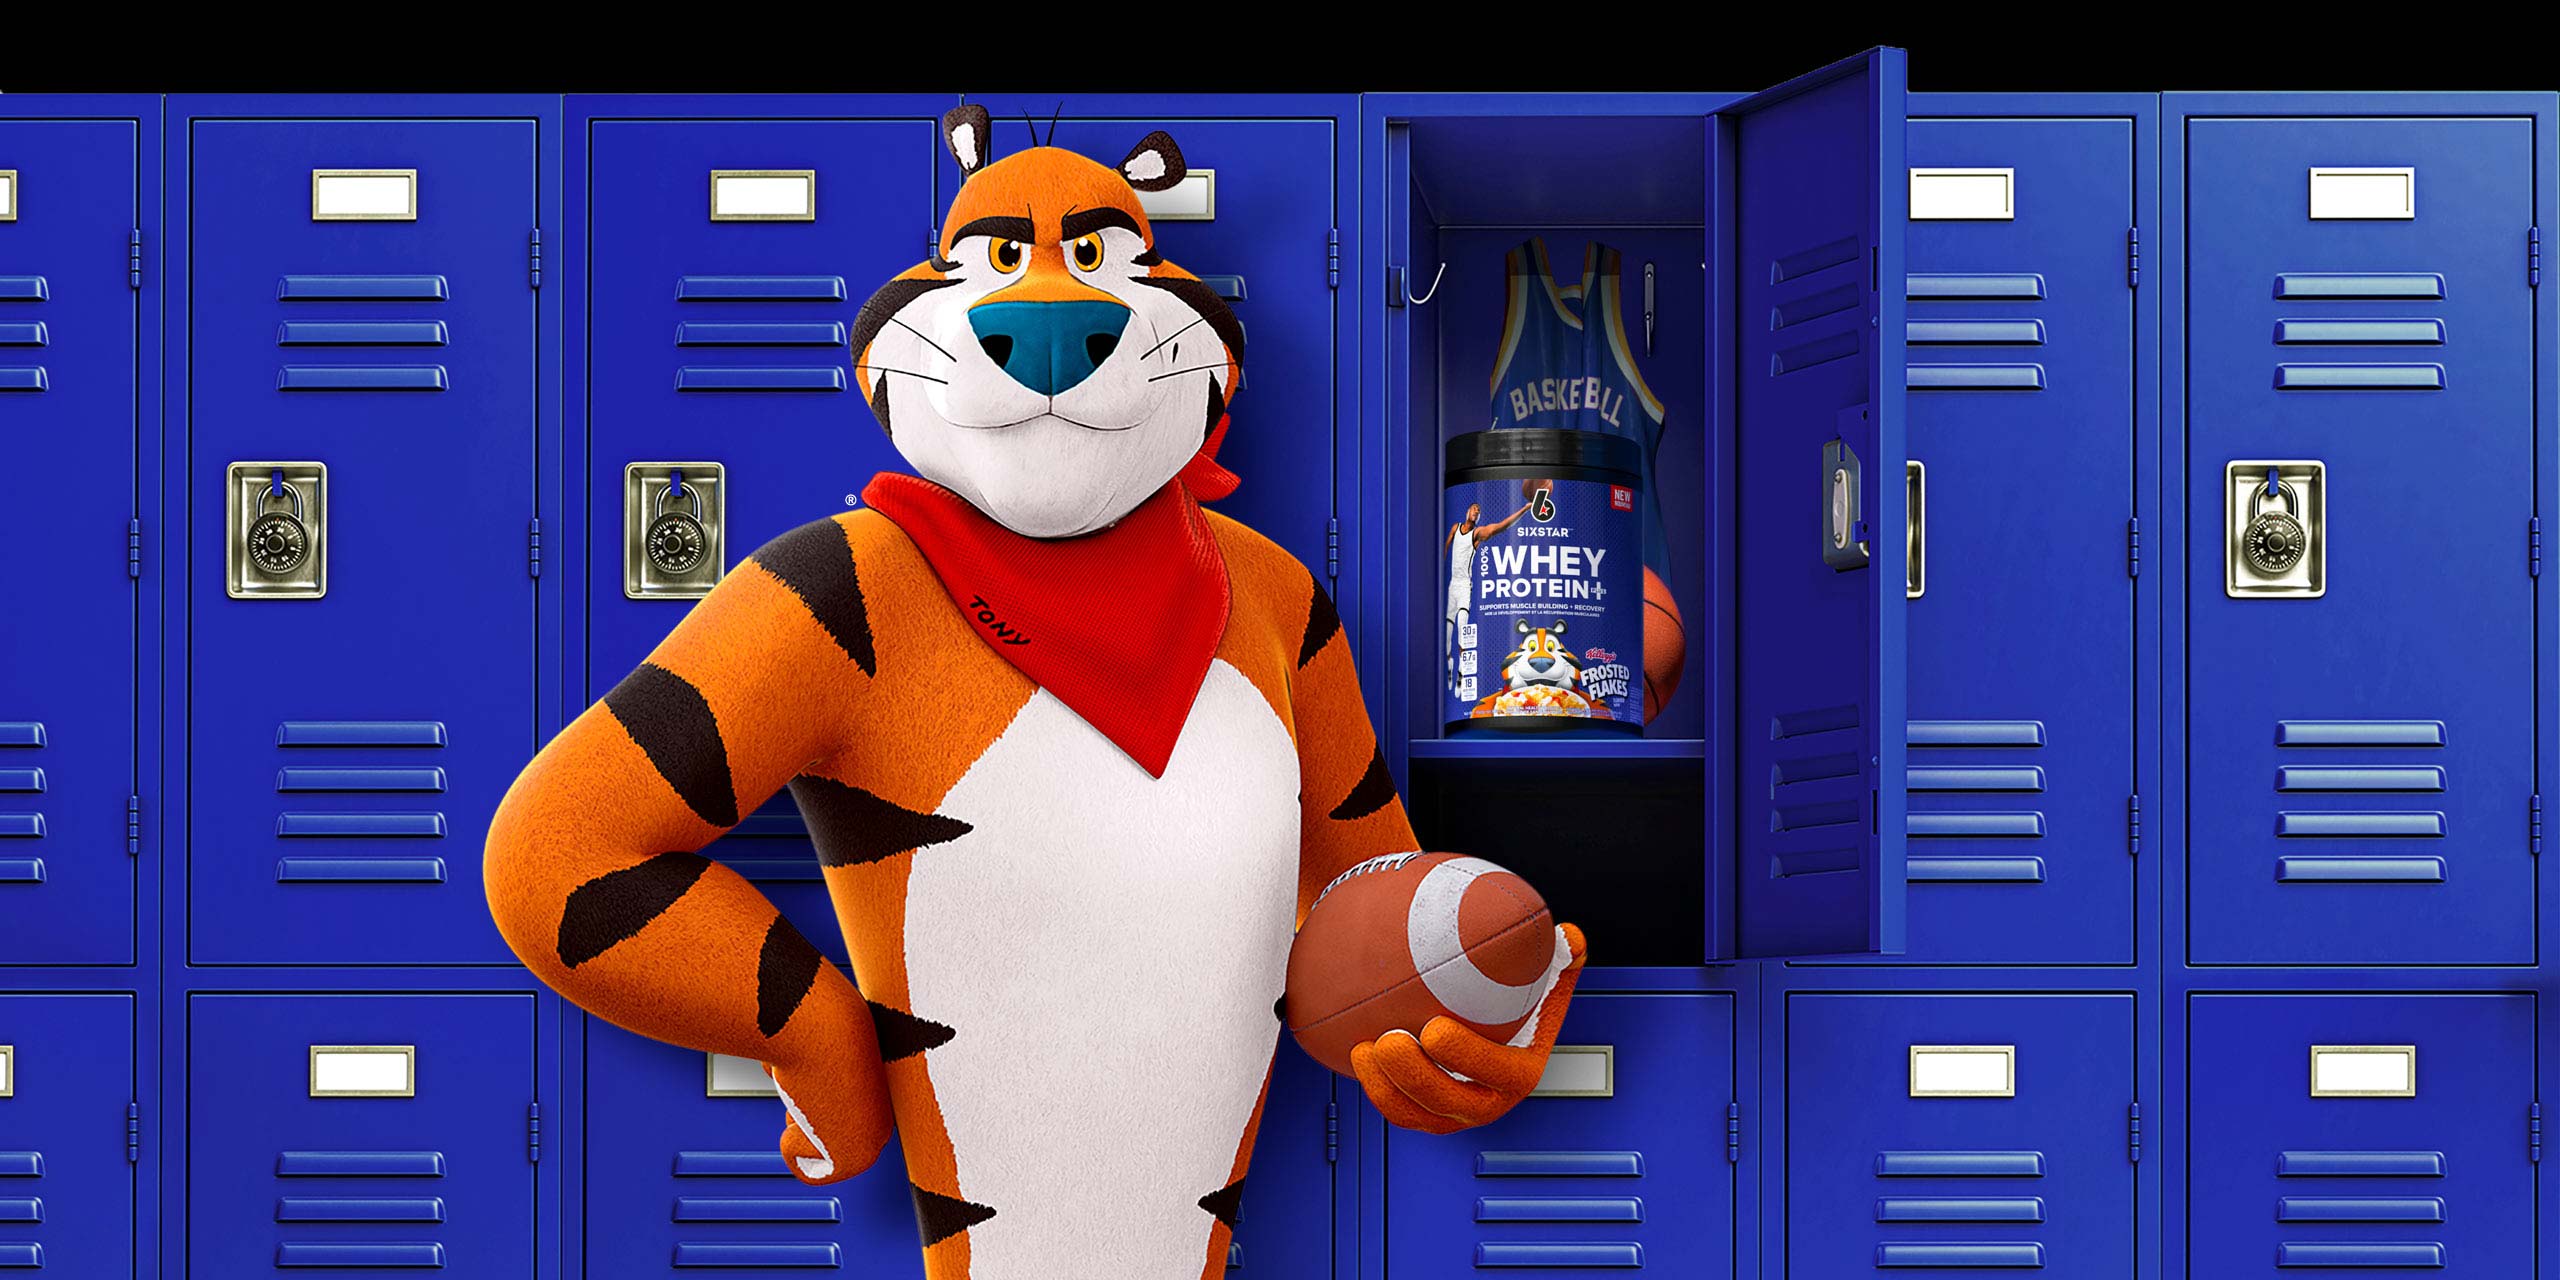 100% Whey Protein Plus Kellogg's Frosted Flakes® at school